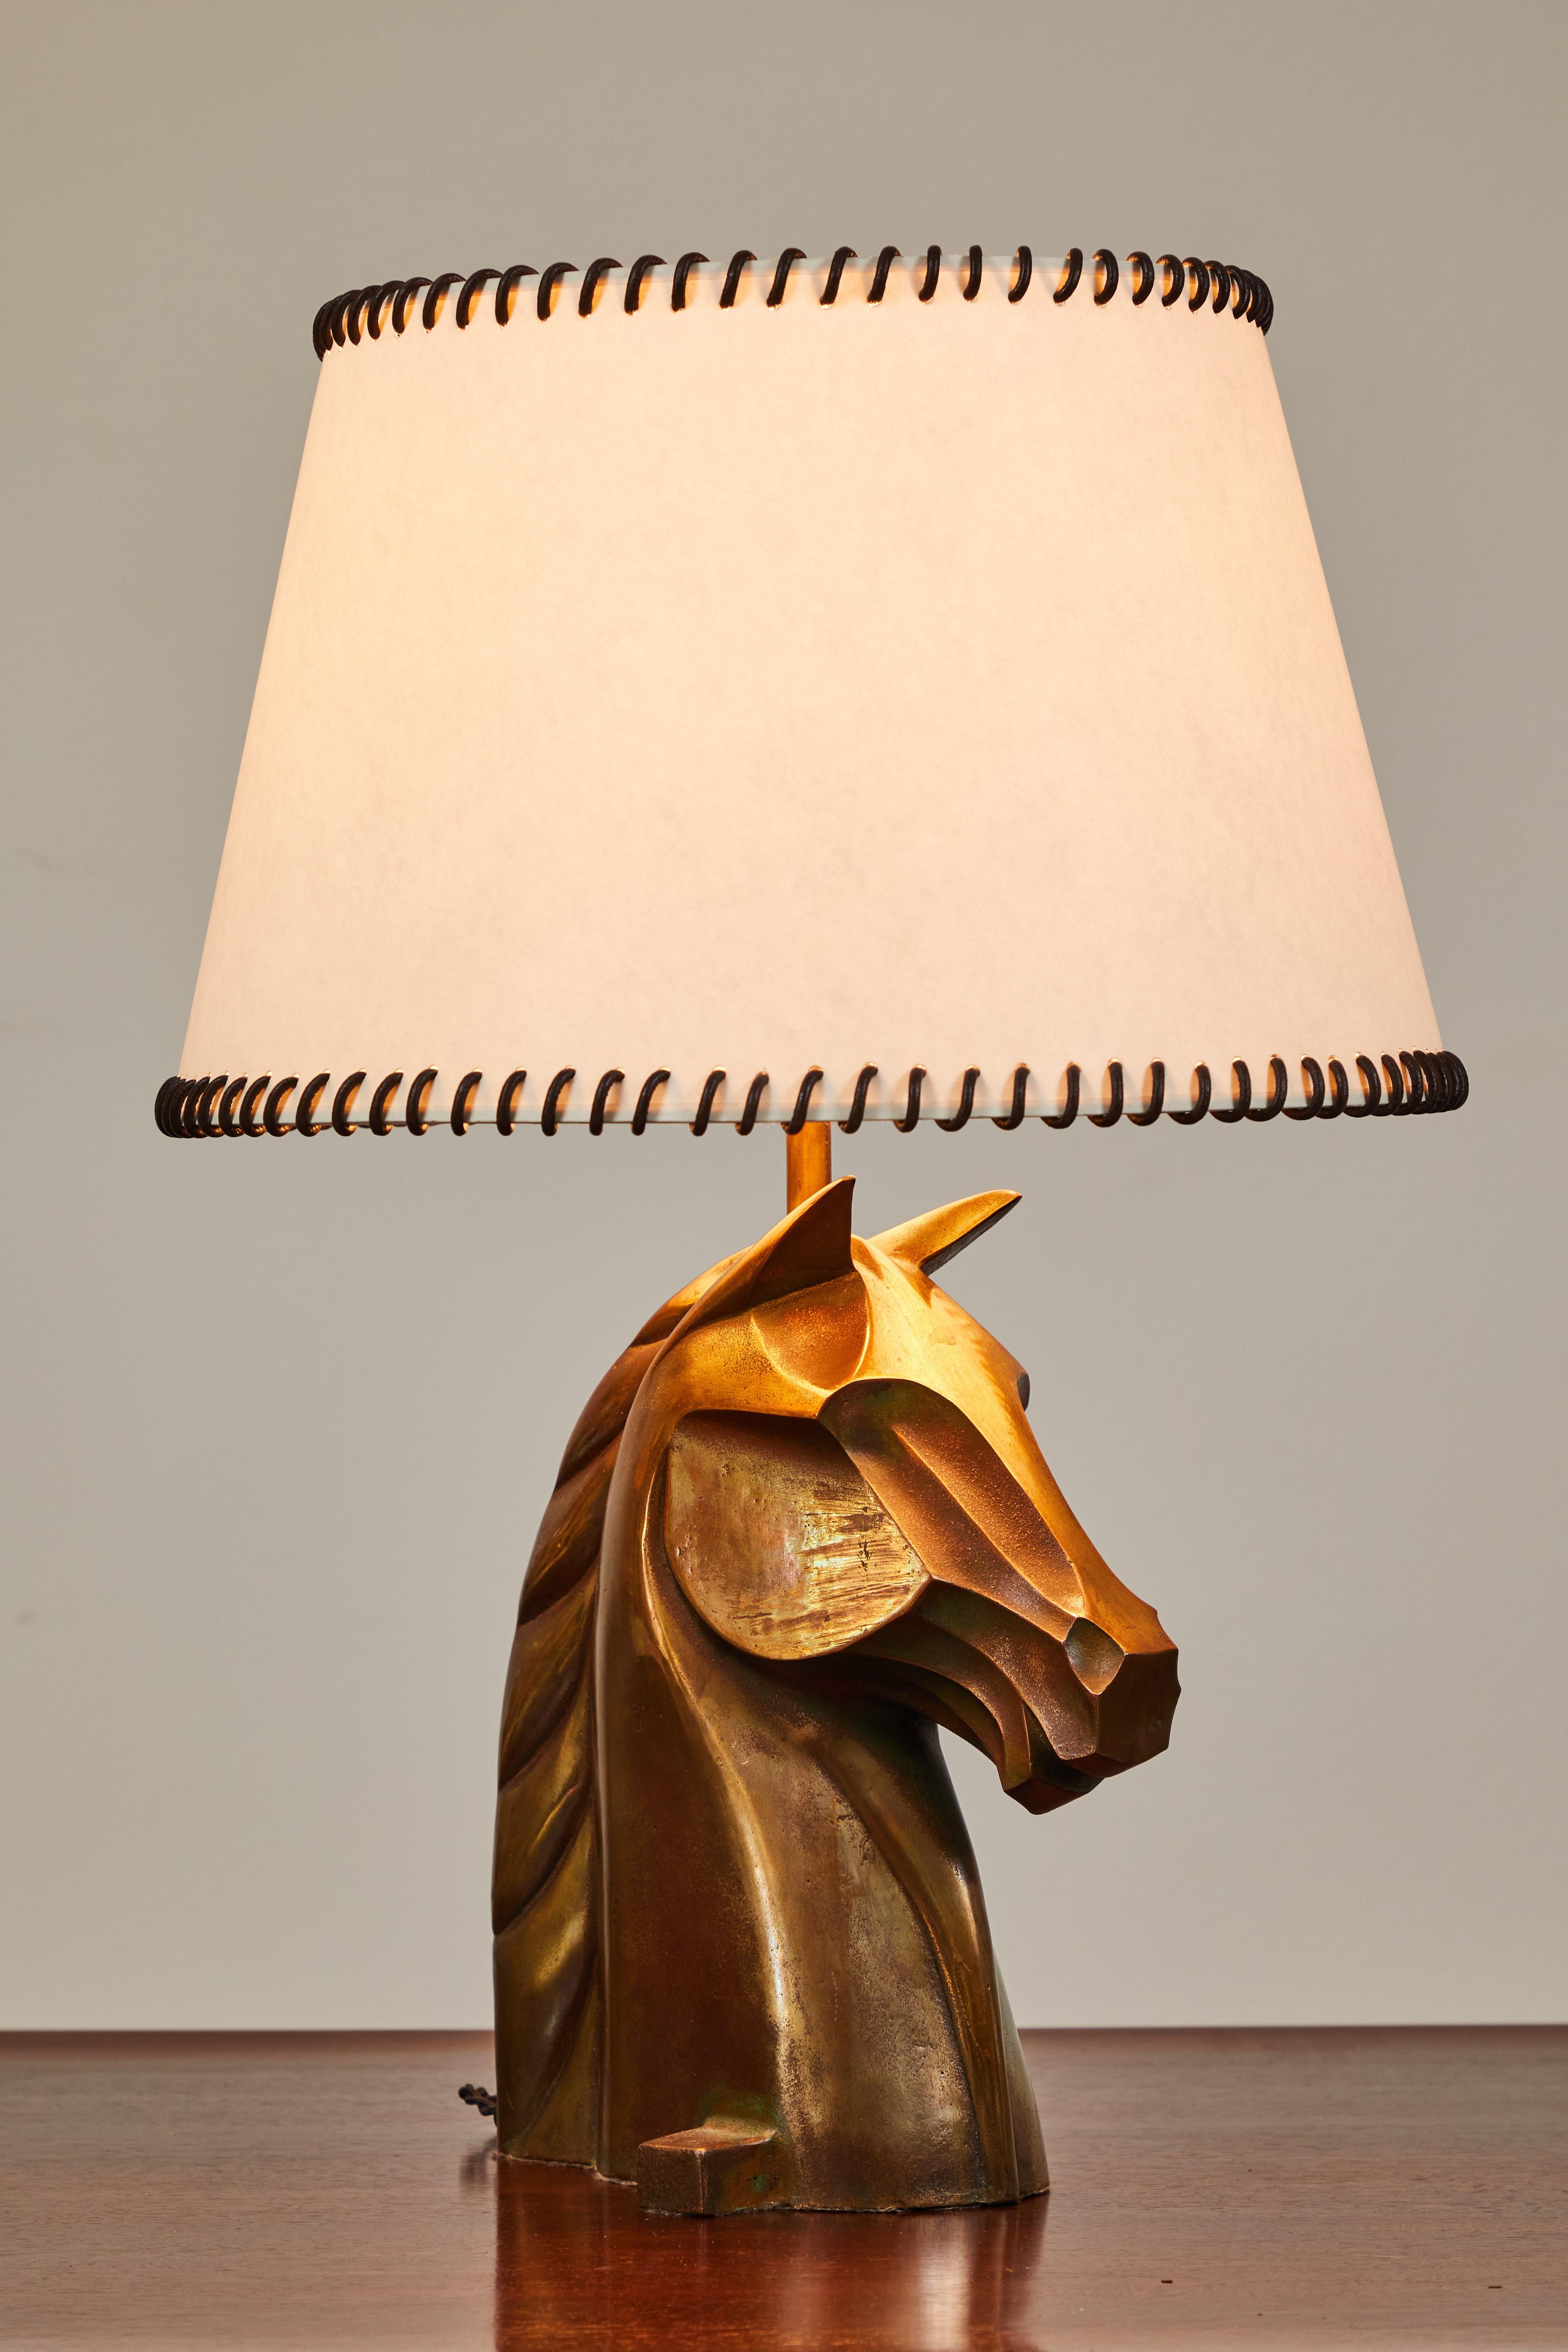 The base of this lamp is a beautiful deco inspired equestrian horse head. Cast in bronze, the horse is illuminated from above when lit. The shade is a soft white paper shade embellished with a dark brown leather whipstitch around both the top and